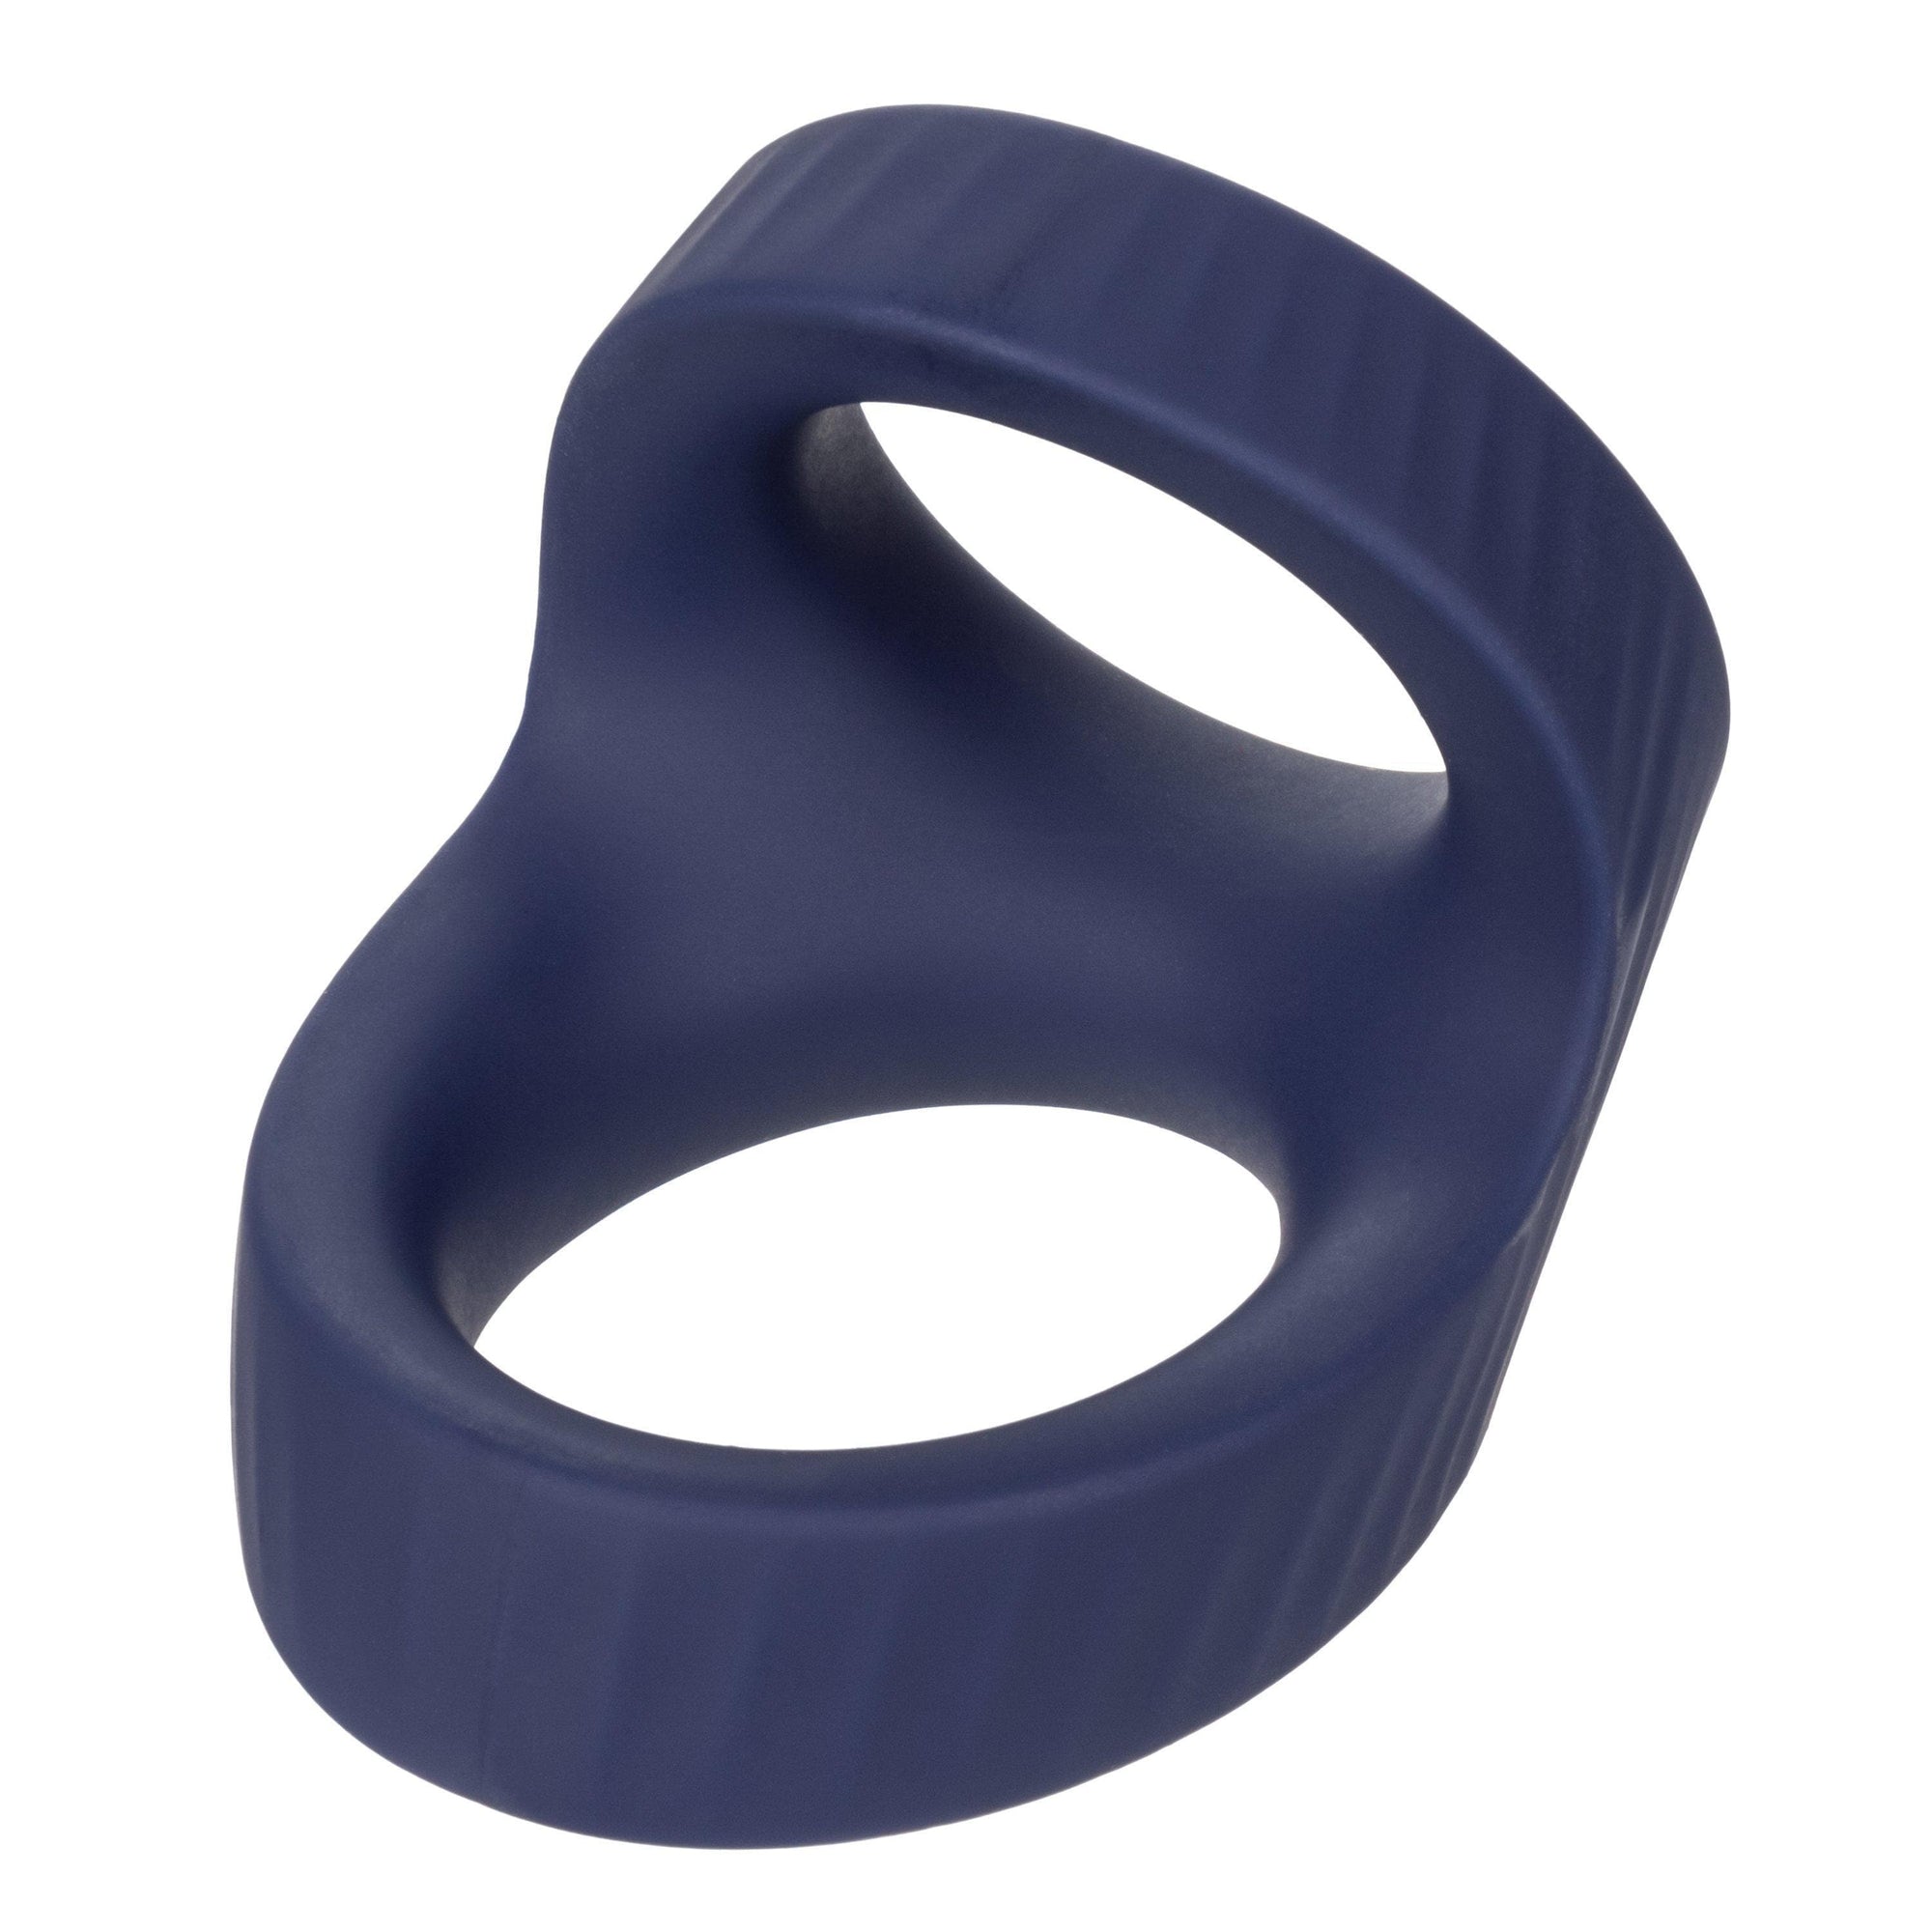 Viceroy Max Dual Ring Silicone Penis Ring - Romantic Blessings